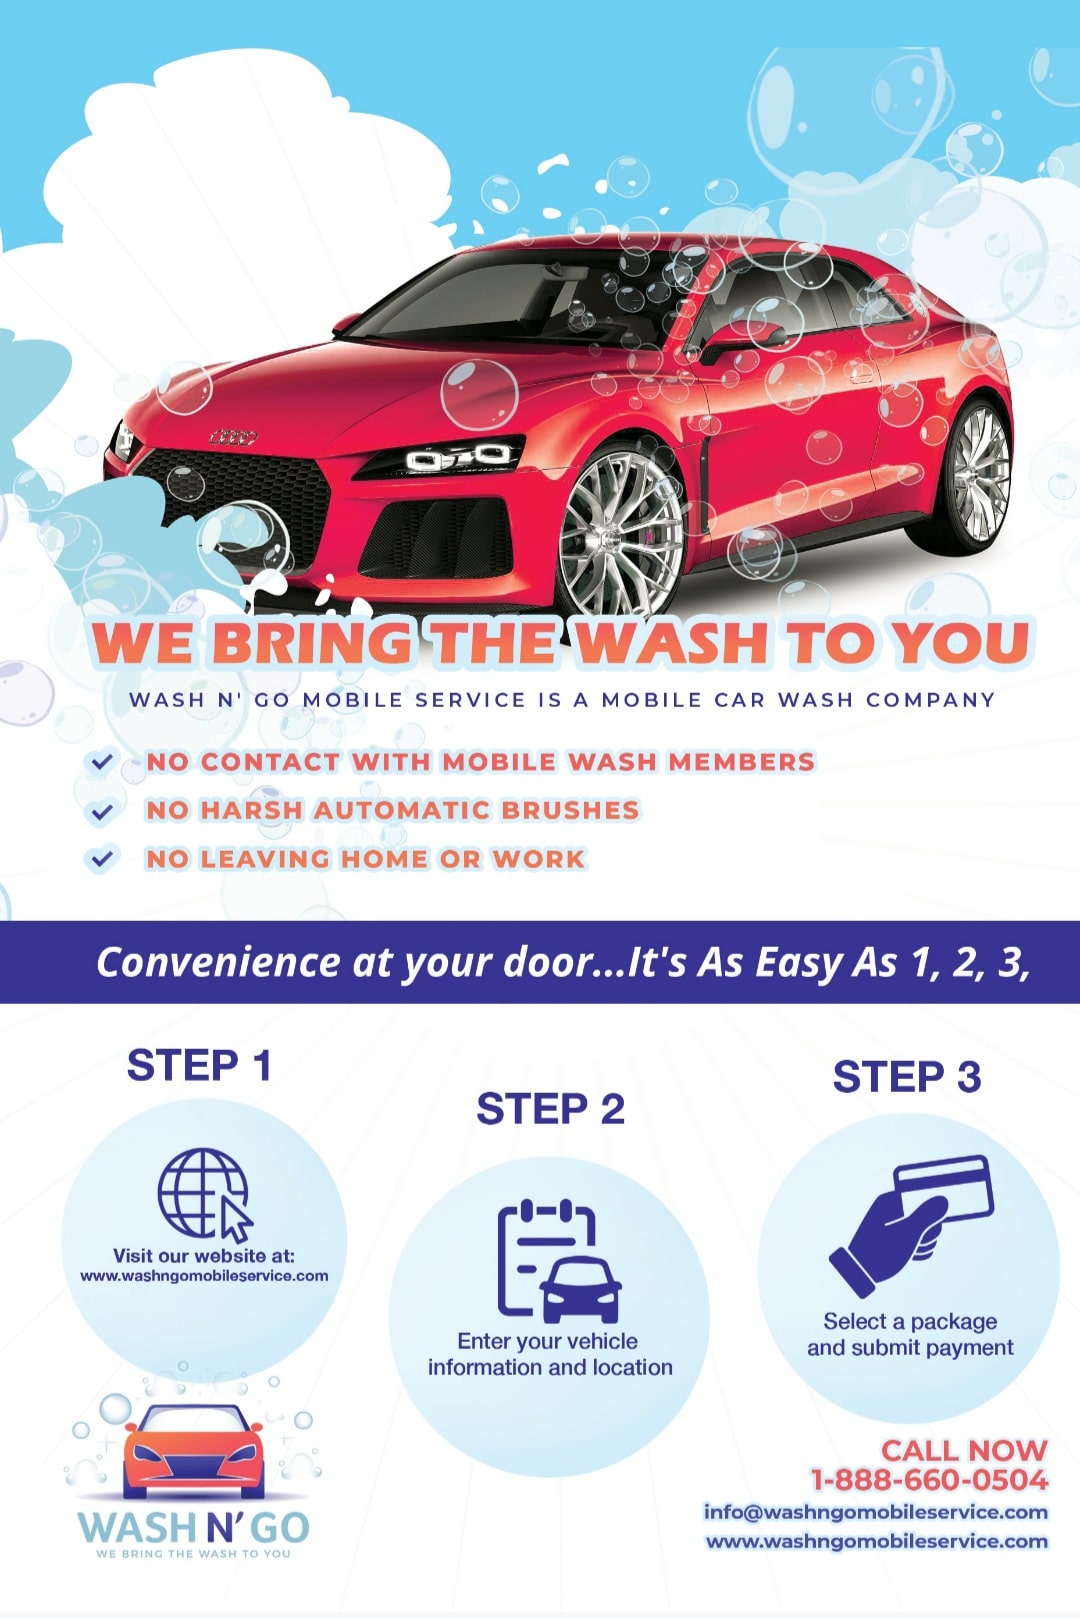 A flyer for a car wash service in The Woodlands, TX offering quality apartments for rent.